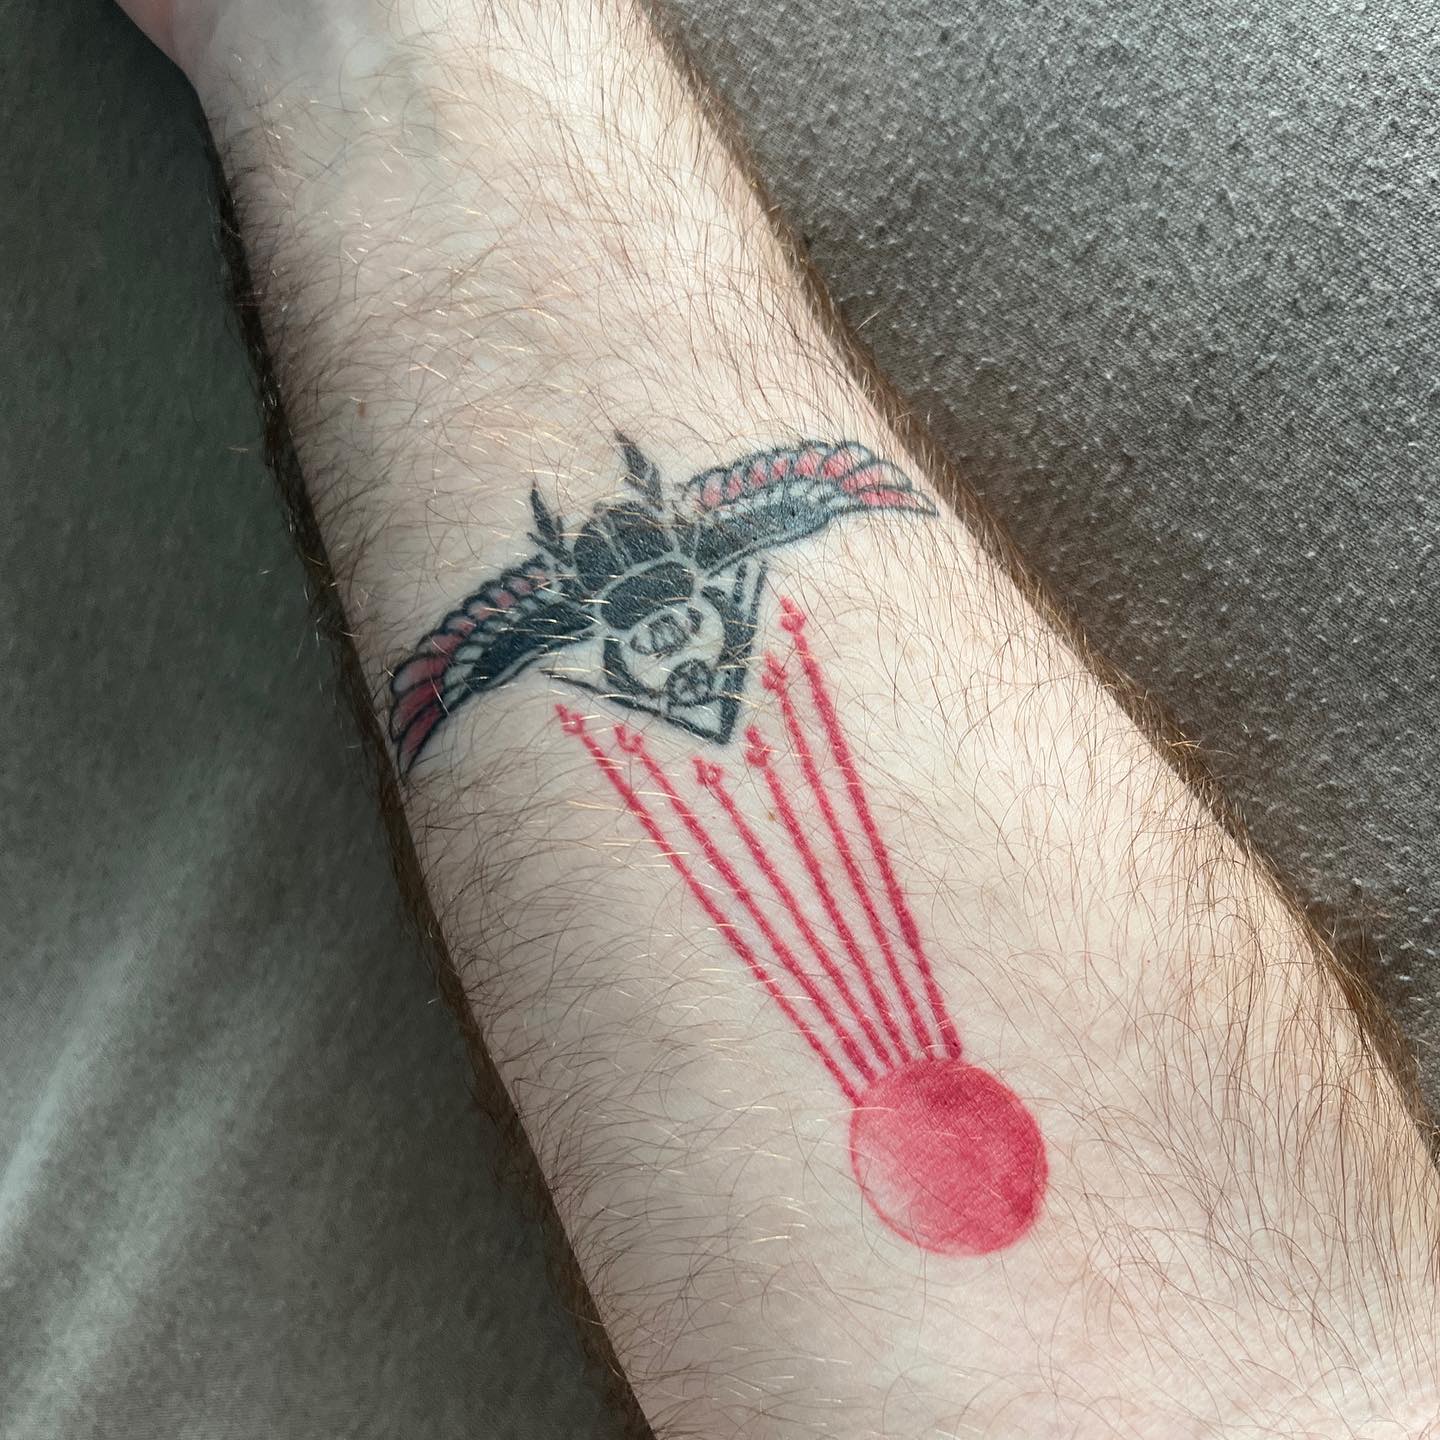 This has been hiding in plain sight for a while. A year ago today I got this tattoo.  As you scroll through you’ll see I went through MANY ideas. I was going to do it for my 30th but we went into a lockdown just after. But at 31 and a half I did it. I imagined it would be a bit more subtle but you know what, seeing the stencil on my whole forearm I was like NOPE. THATS IT. Subtle at the right angle, but in your face. It was the next step on a journey of embracing and discovering myself and being open to possibilities. There’s an explanation slide on the individual elements, but this shows my love of Egyptian archaeology, and the cycle of life, death, and rebirth. Recreating who we are and discovering who we are each time. Huge shout out to @troymaboy for the great job - and yes, I’m sure I’ll get a Dragonball one at some point!